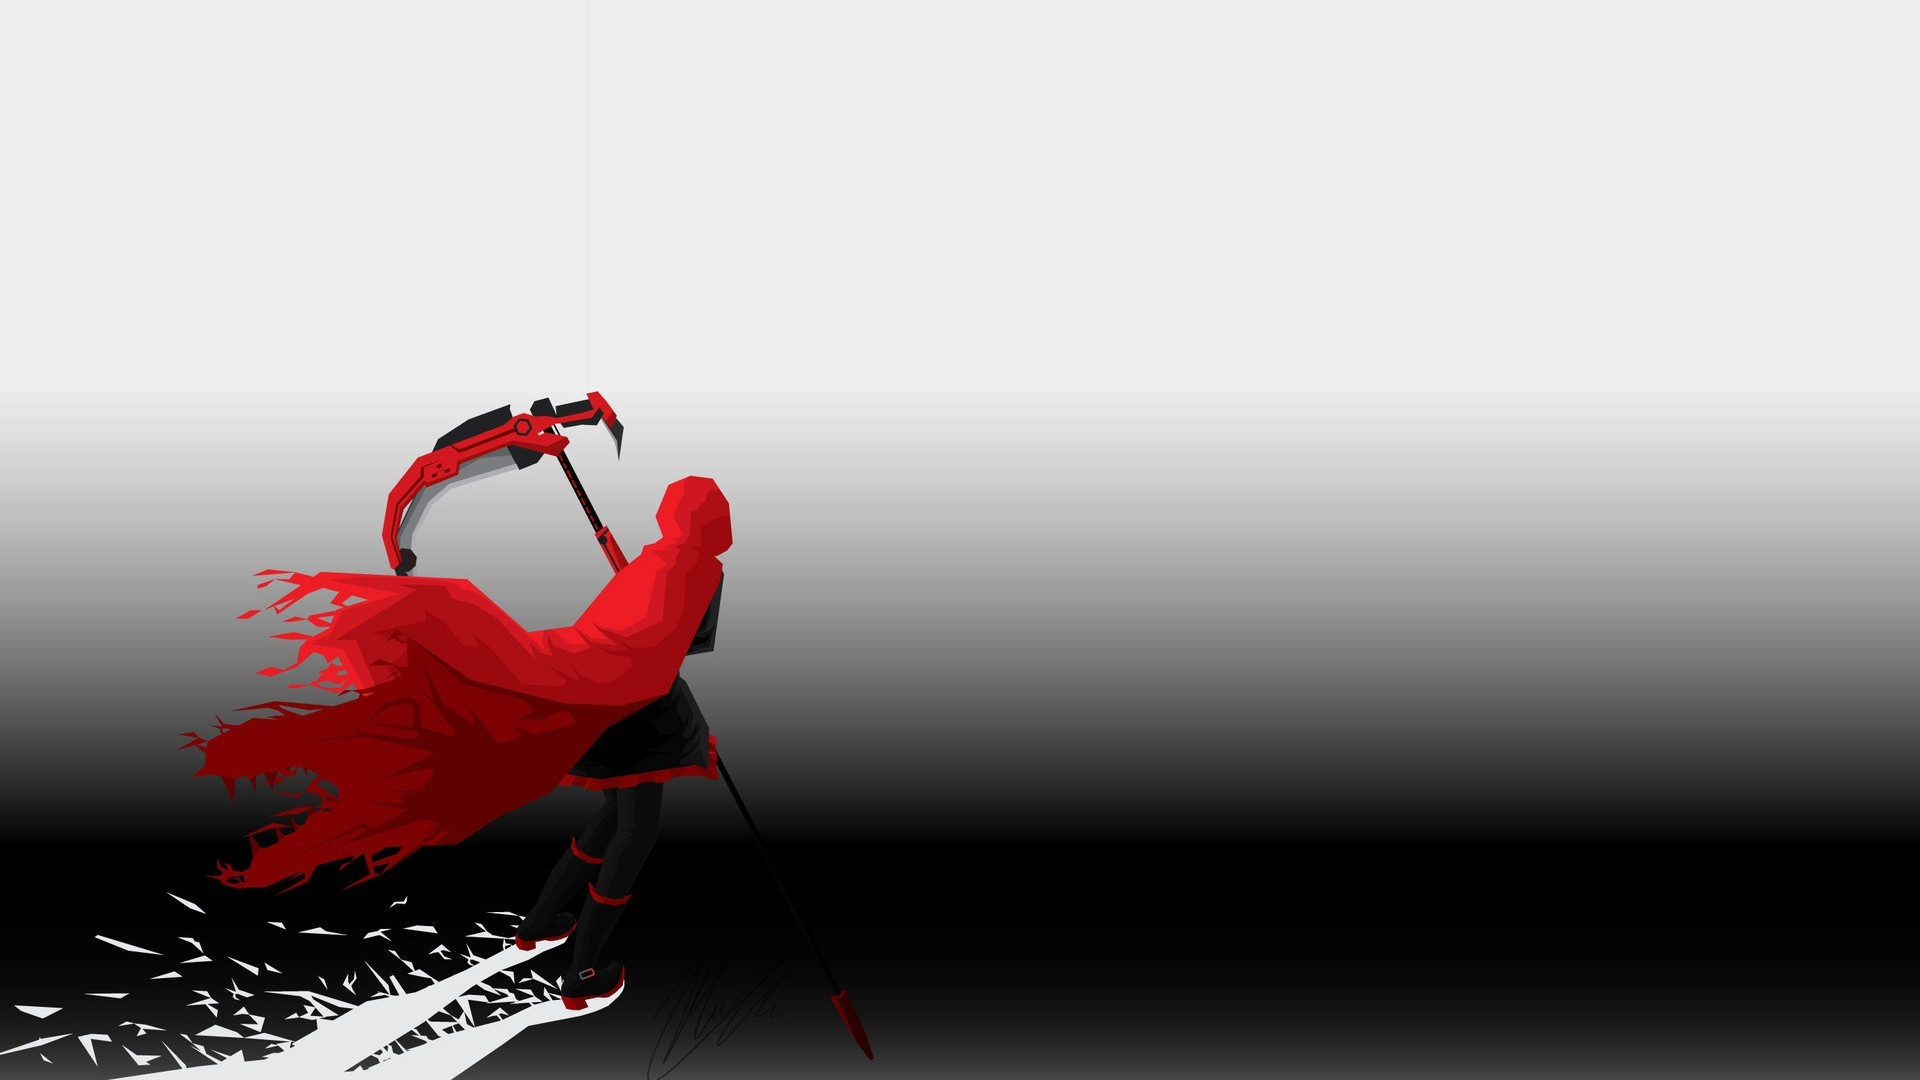 1920x1080 Wallpaper : illustration, anime, logo, RWBY, brand, Ruby Rose character, bird, hand, font ConsistentHypocrite 133752 HD Wallpapers